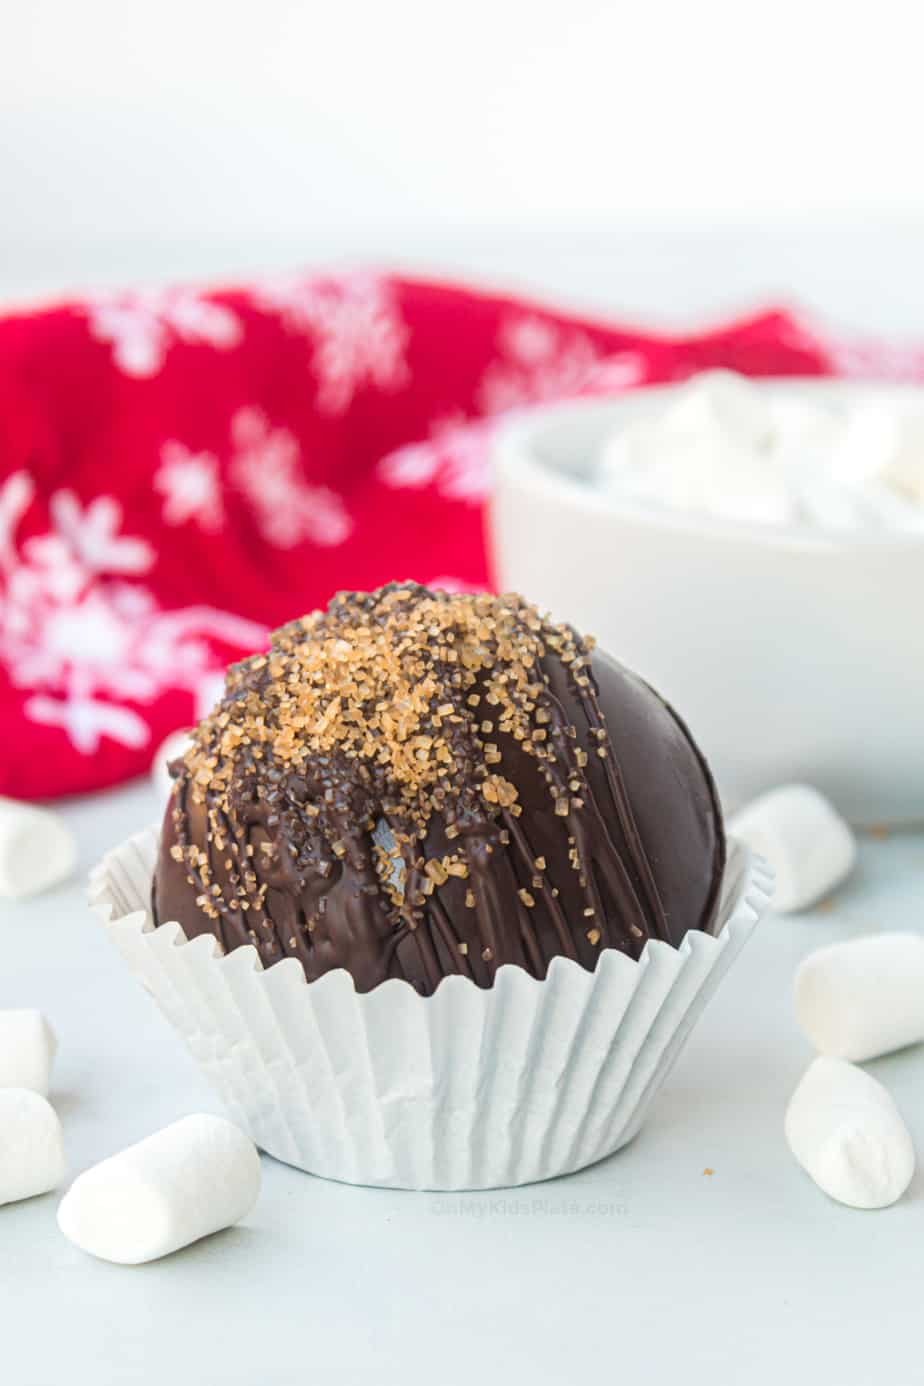 Hot chocolate bombs in a cupcake liner decorated with drizzled chocolate and raw sugar.